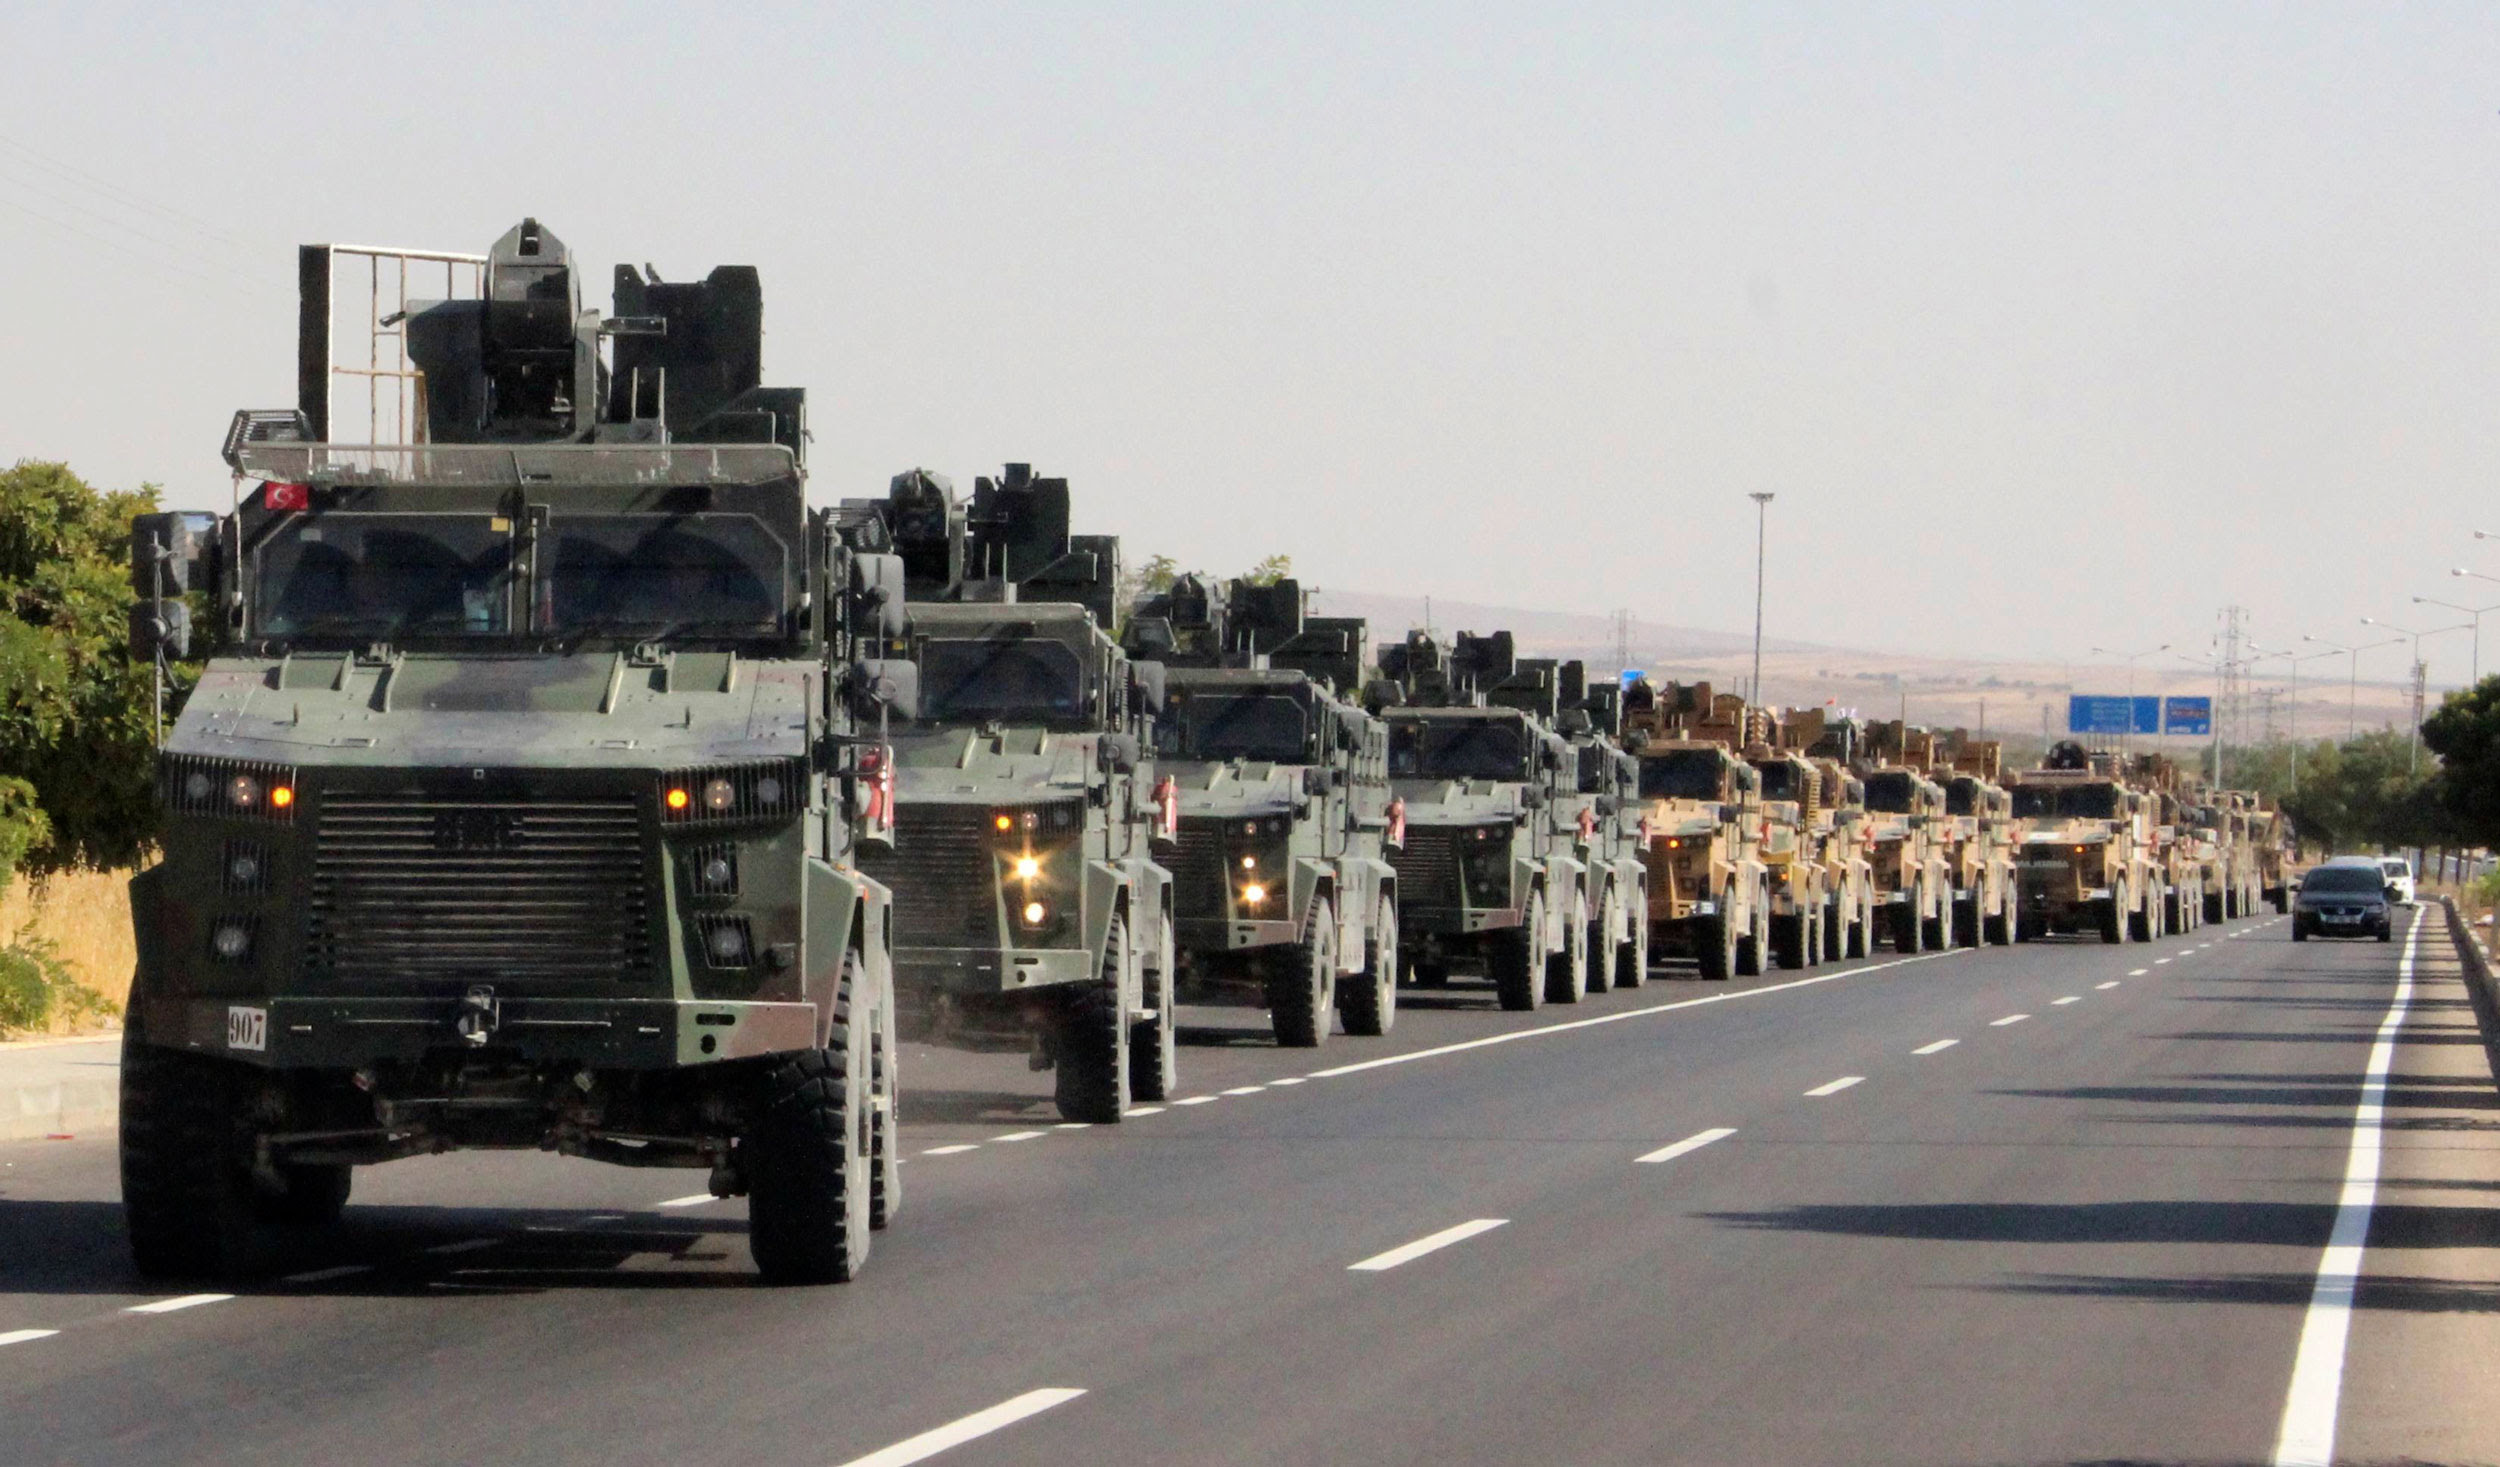 A Turkish miltary convoy is pictured in Kilis near the Turkish-Syrian border, Turkey.